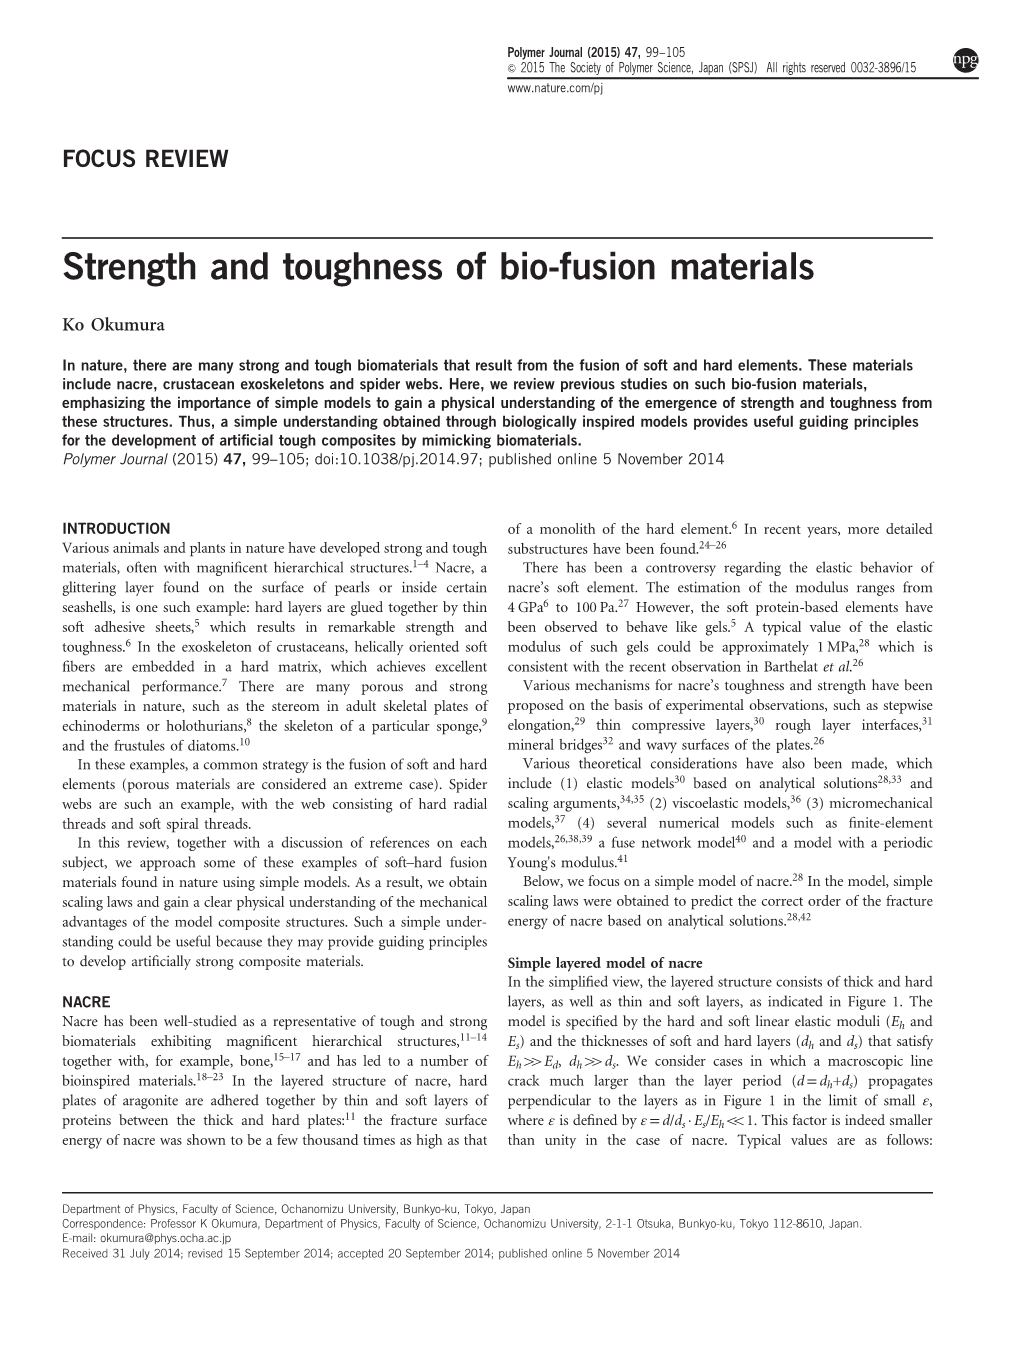 Strength and Toughness of Bio-Fusion Materials